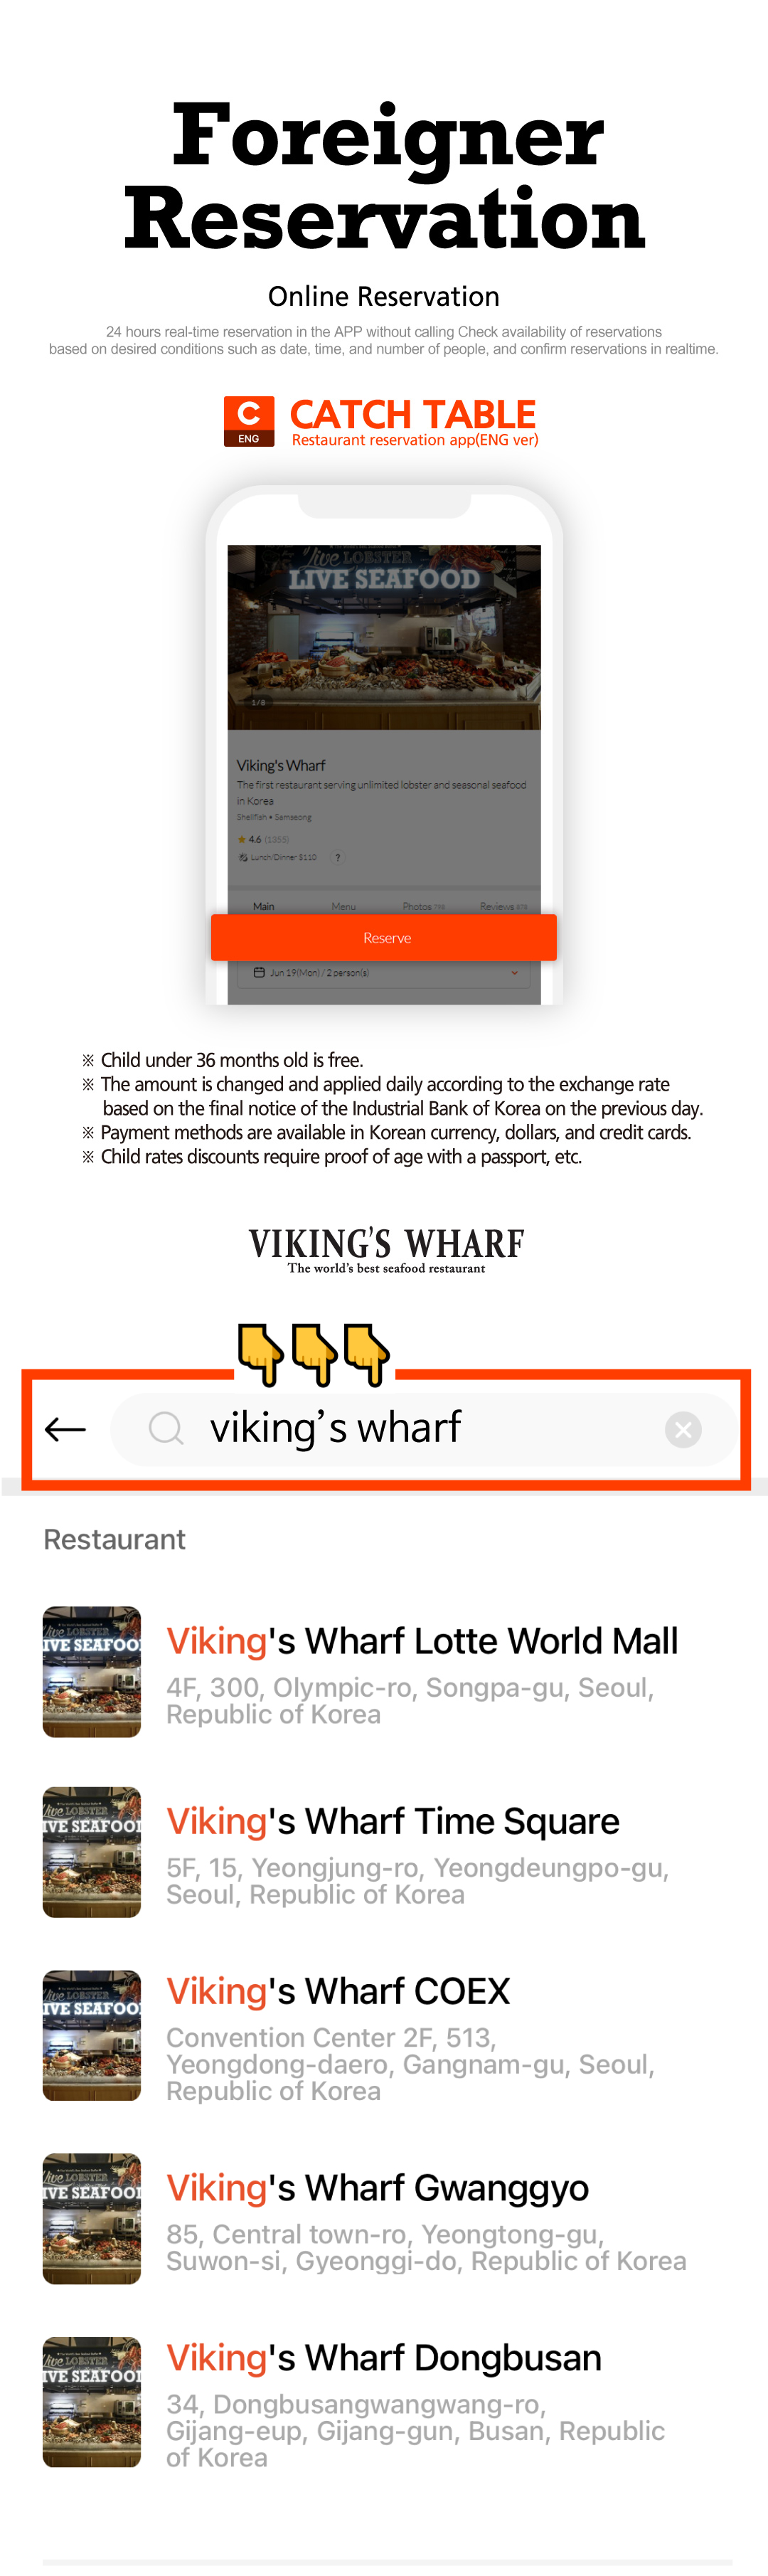 [VIKINGS WHARF] Online Reservation (Foreign)